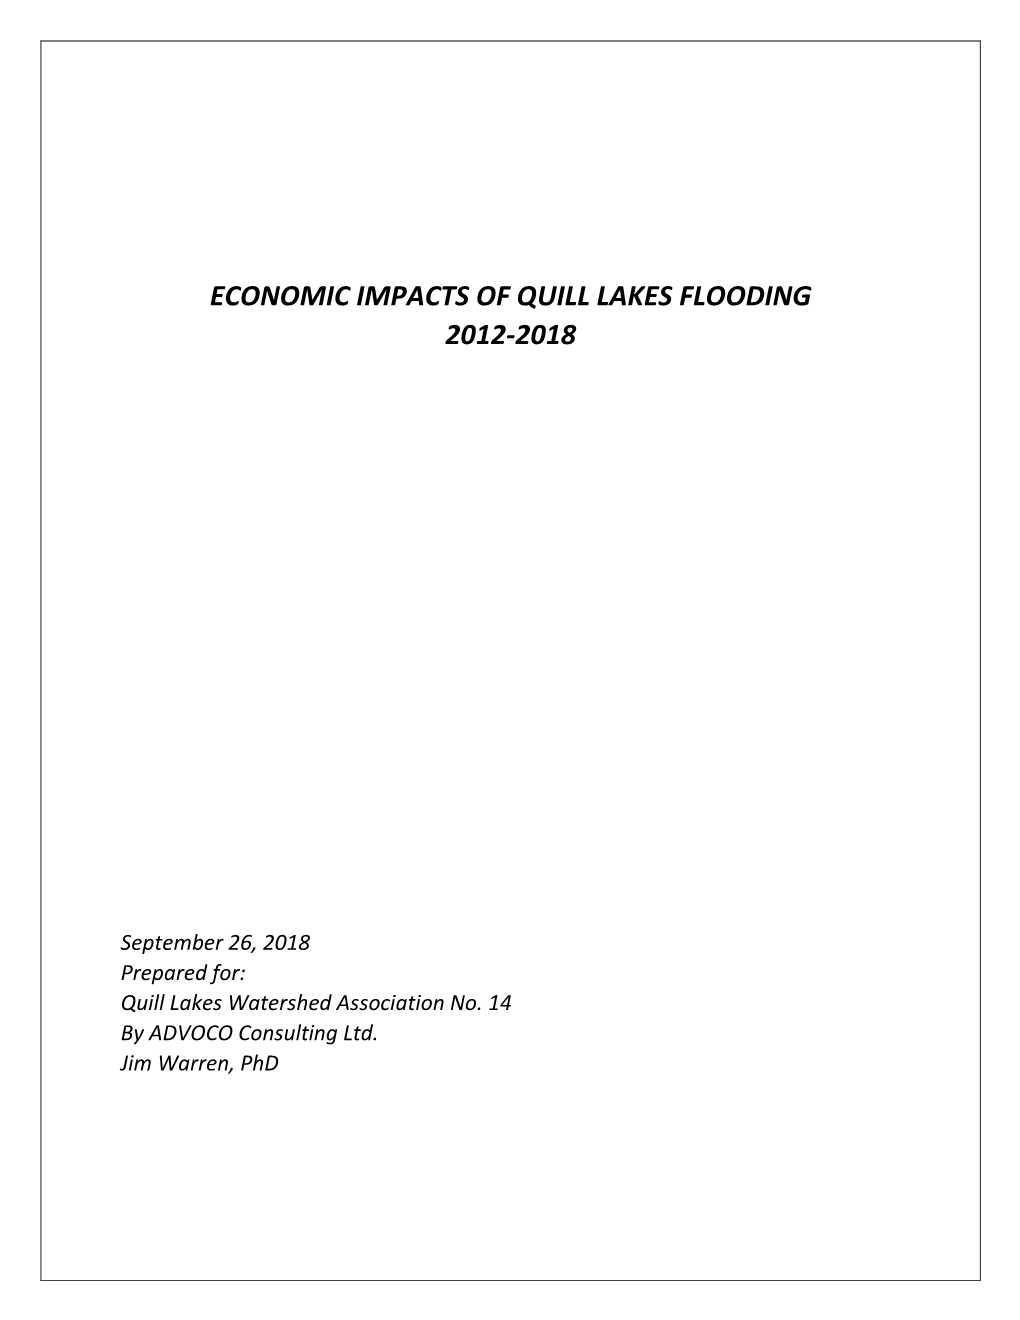 Economic Impacts of Quill Lakes Flooding 2012-2018